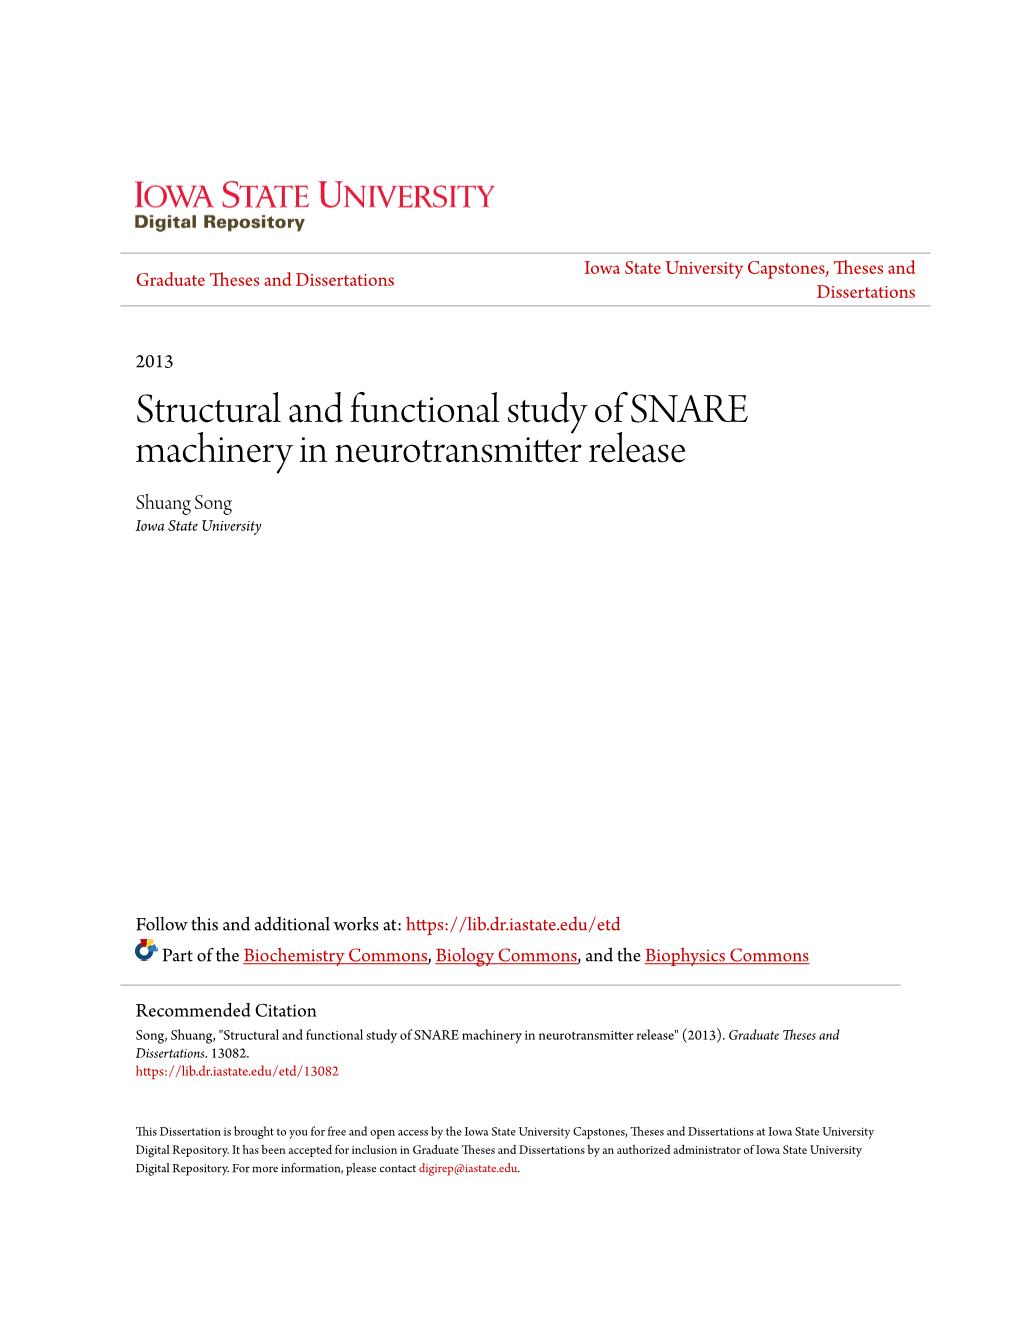 Structural and Functional Study of SNARE Machinery in Neurotransmitter Release Shuang Song Iowa State University